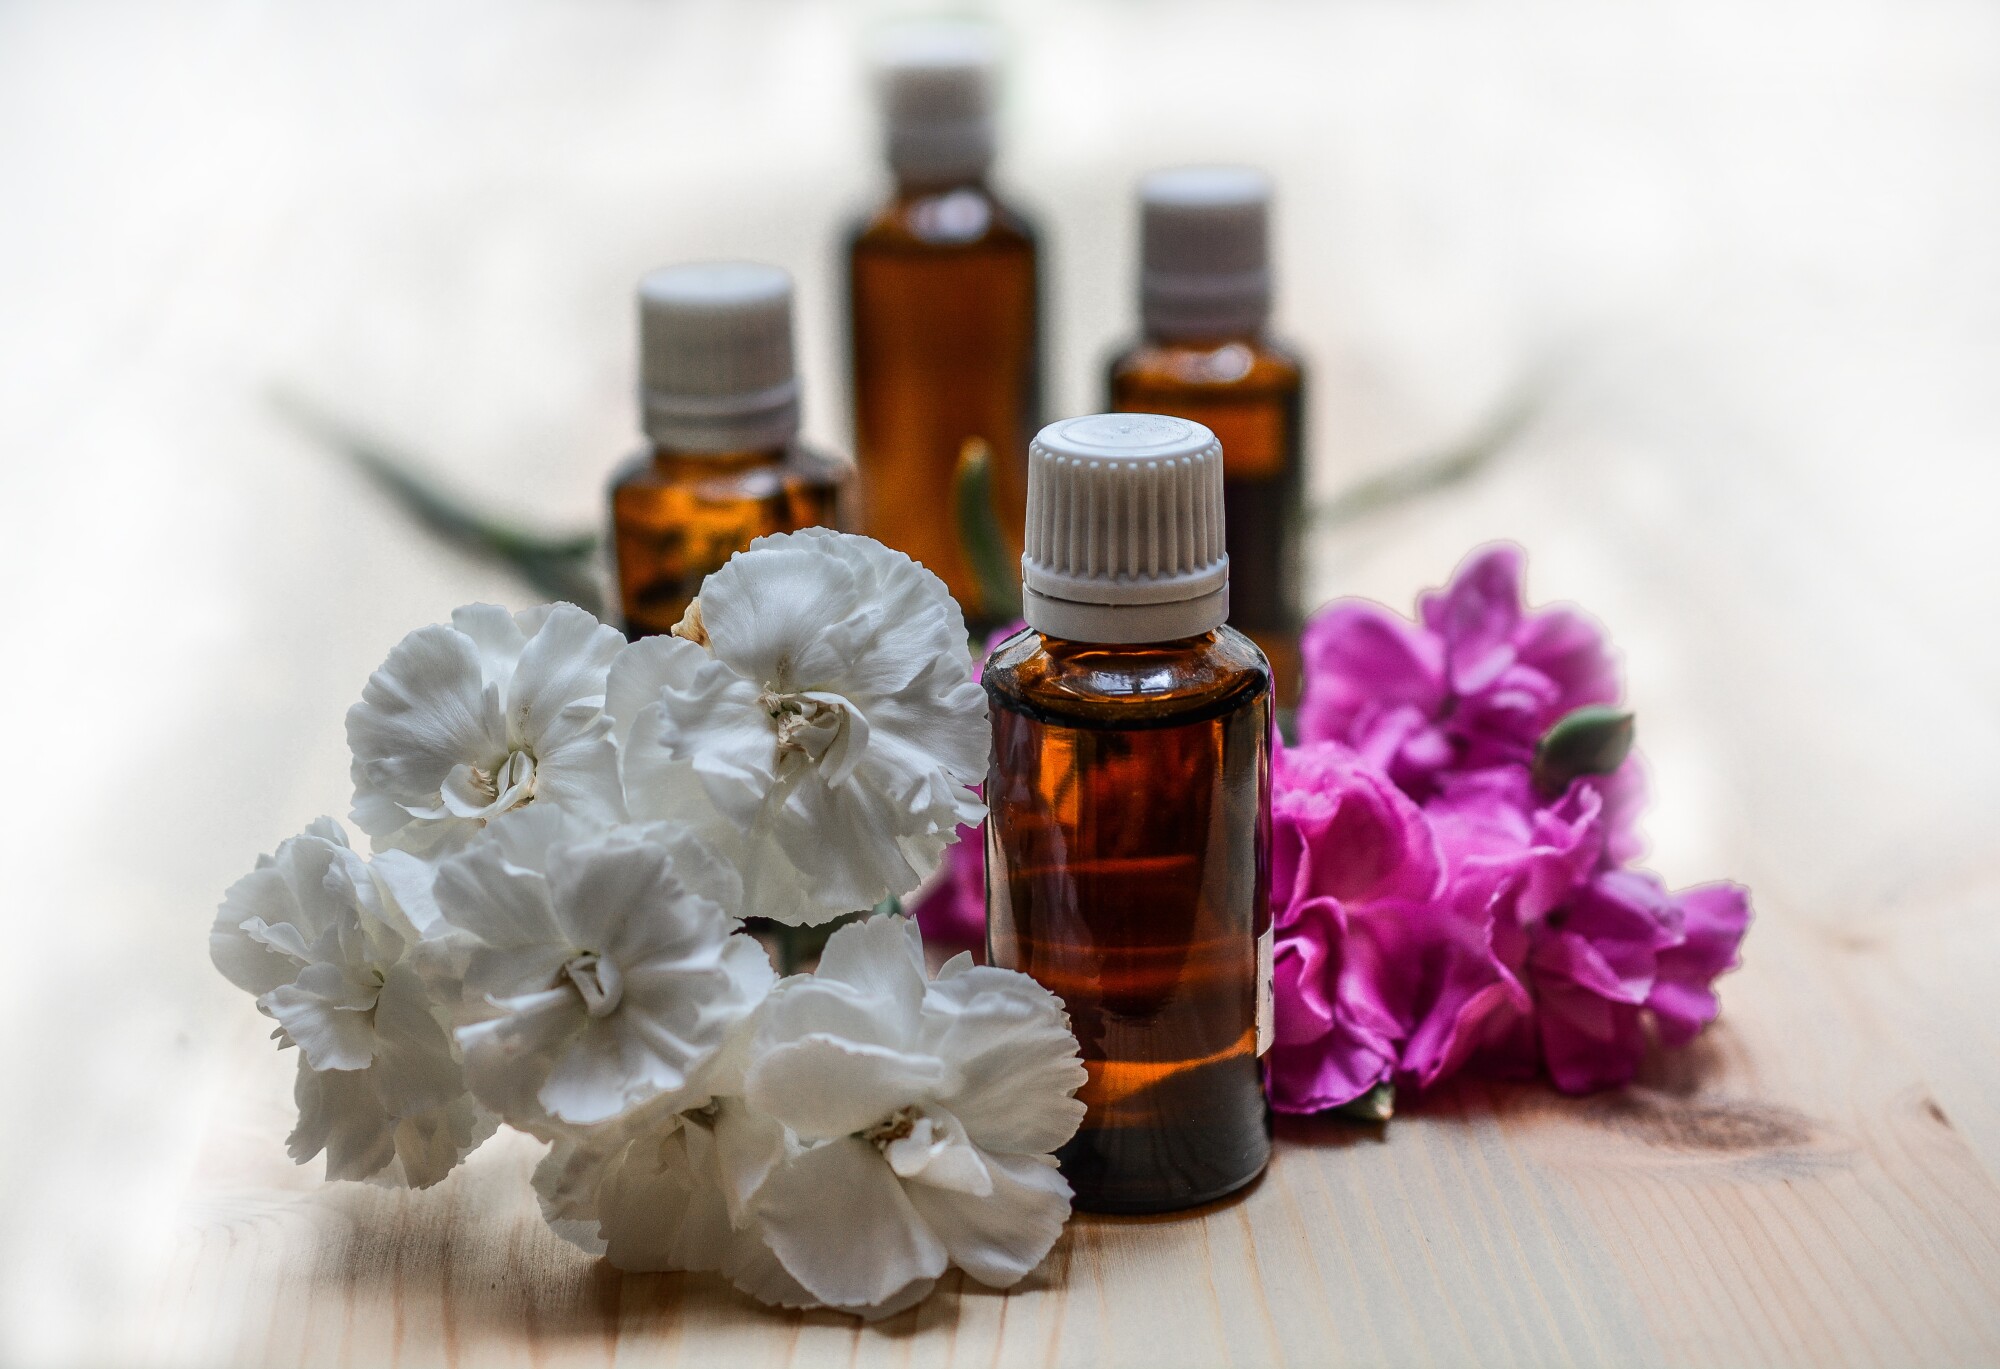 How Many Drops Are In Essential Oils Bottles? | FH Packaging